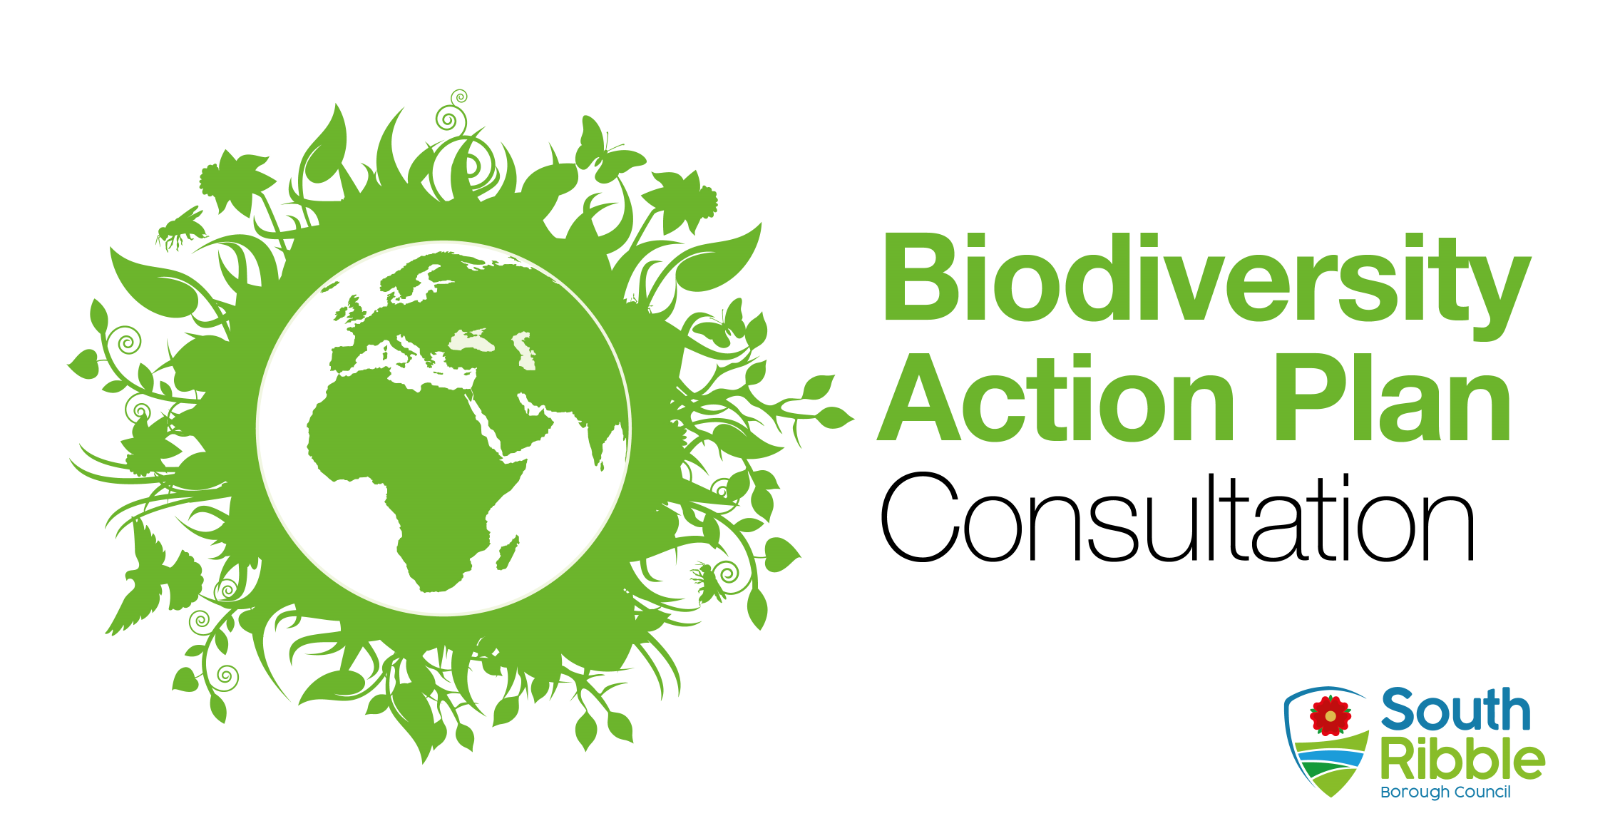 A green planet surrounded by various leaves and insects beside the text Biodiversity Action Plan Consultation and the South Ribble Borough Council logo